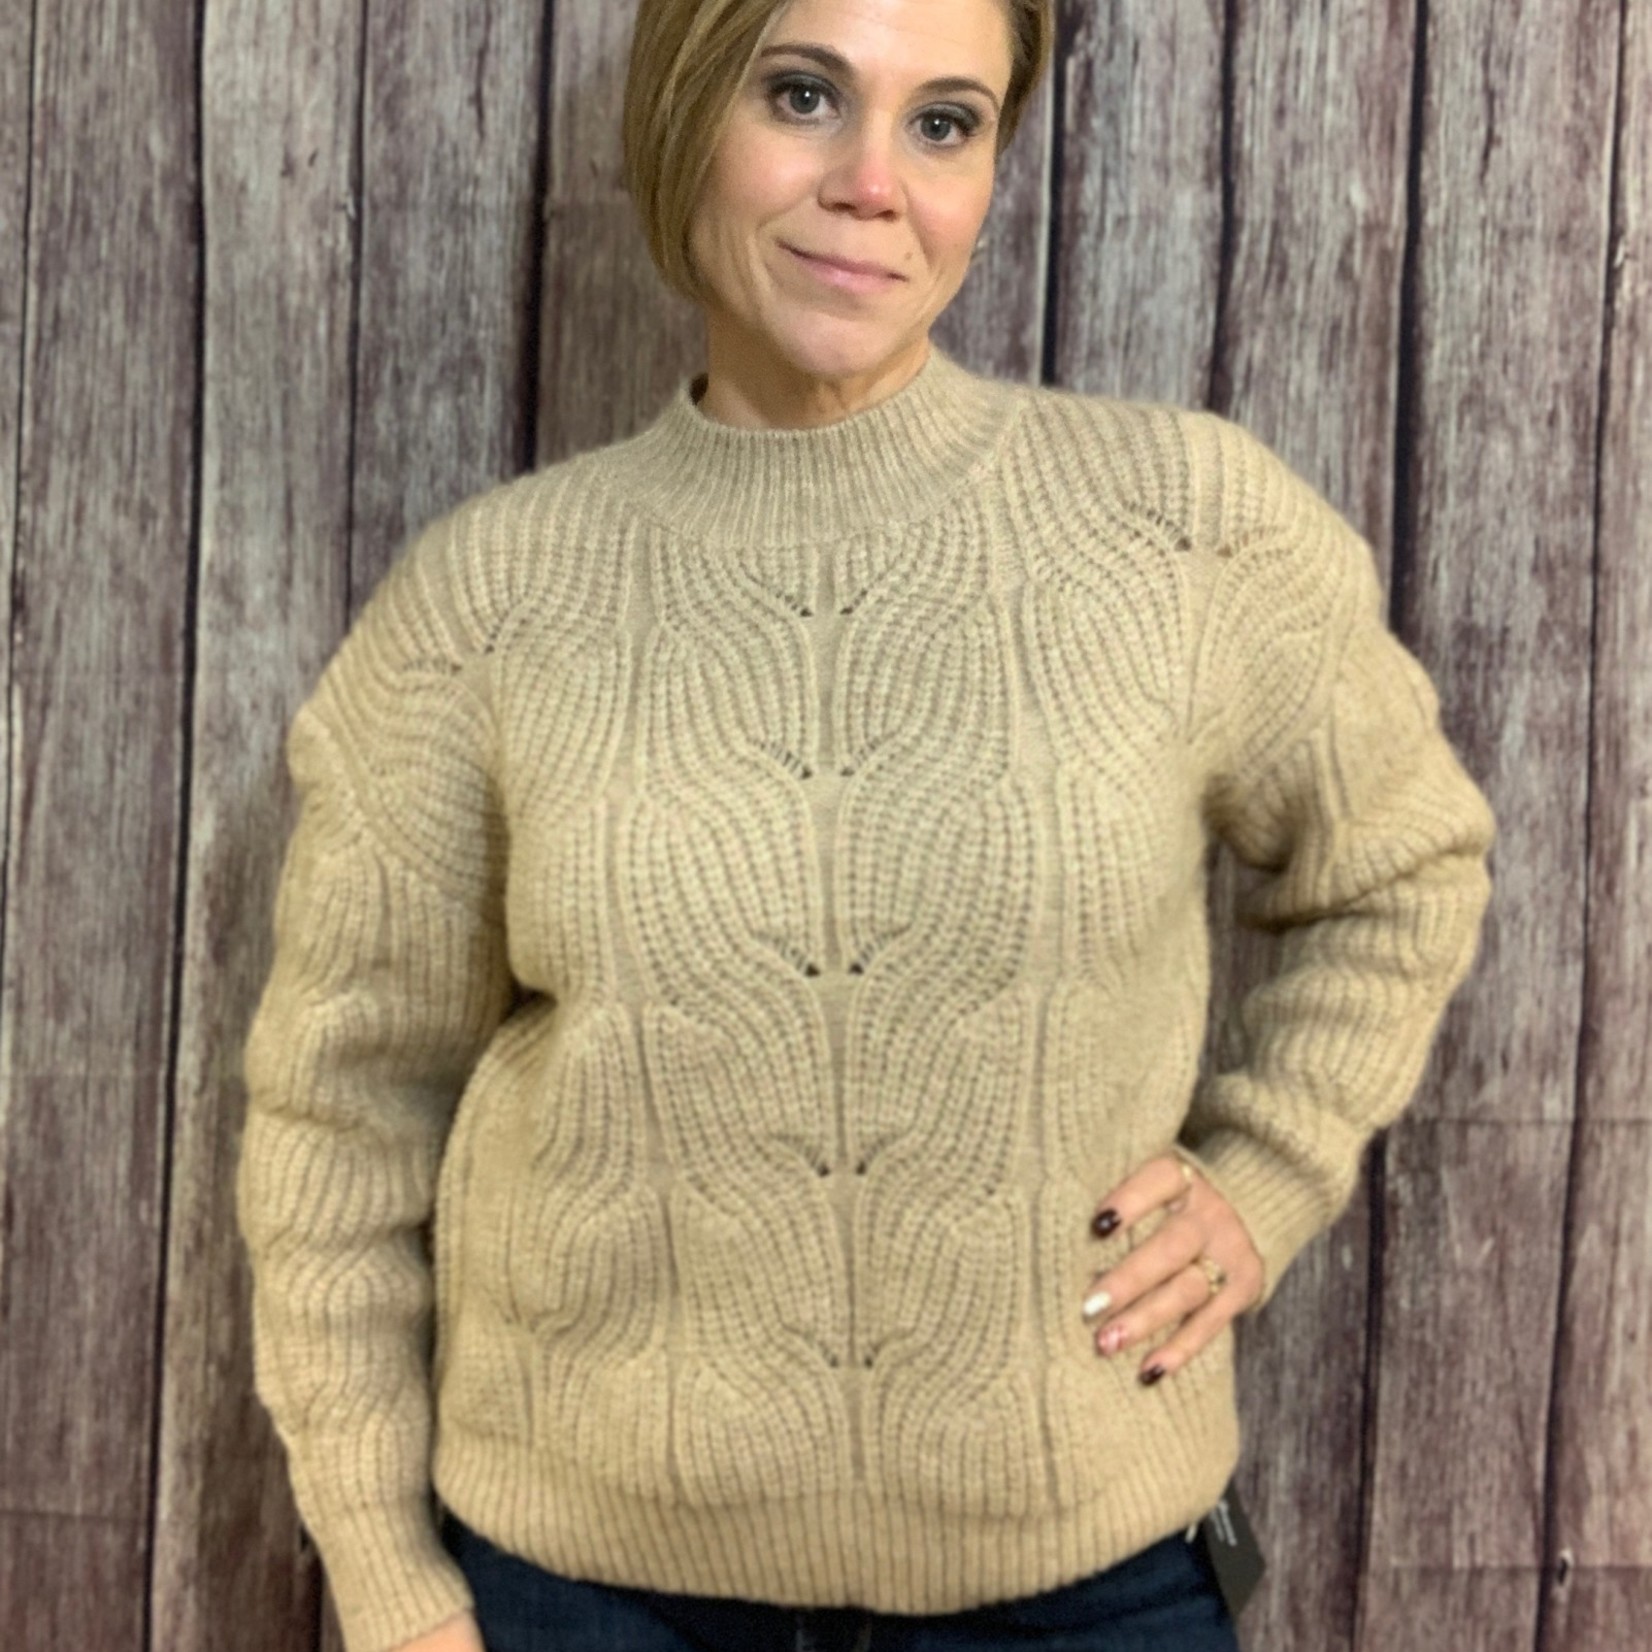 Molly Bracken Cable Knit Sweater